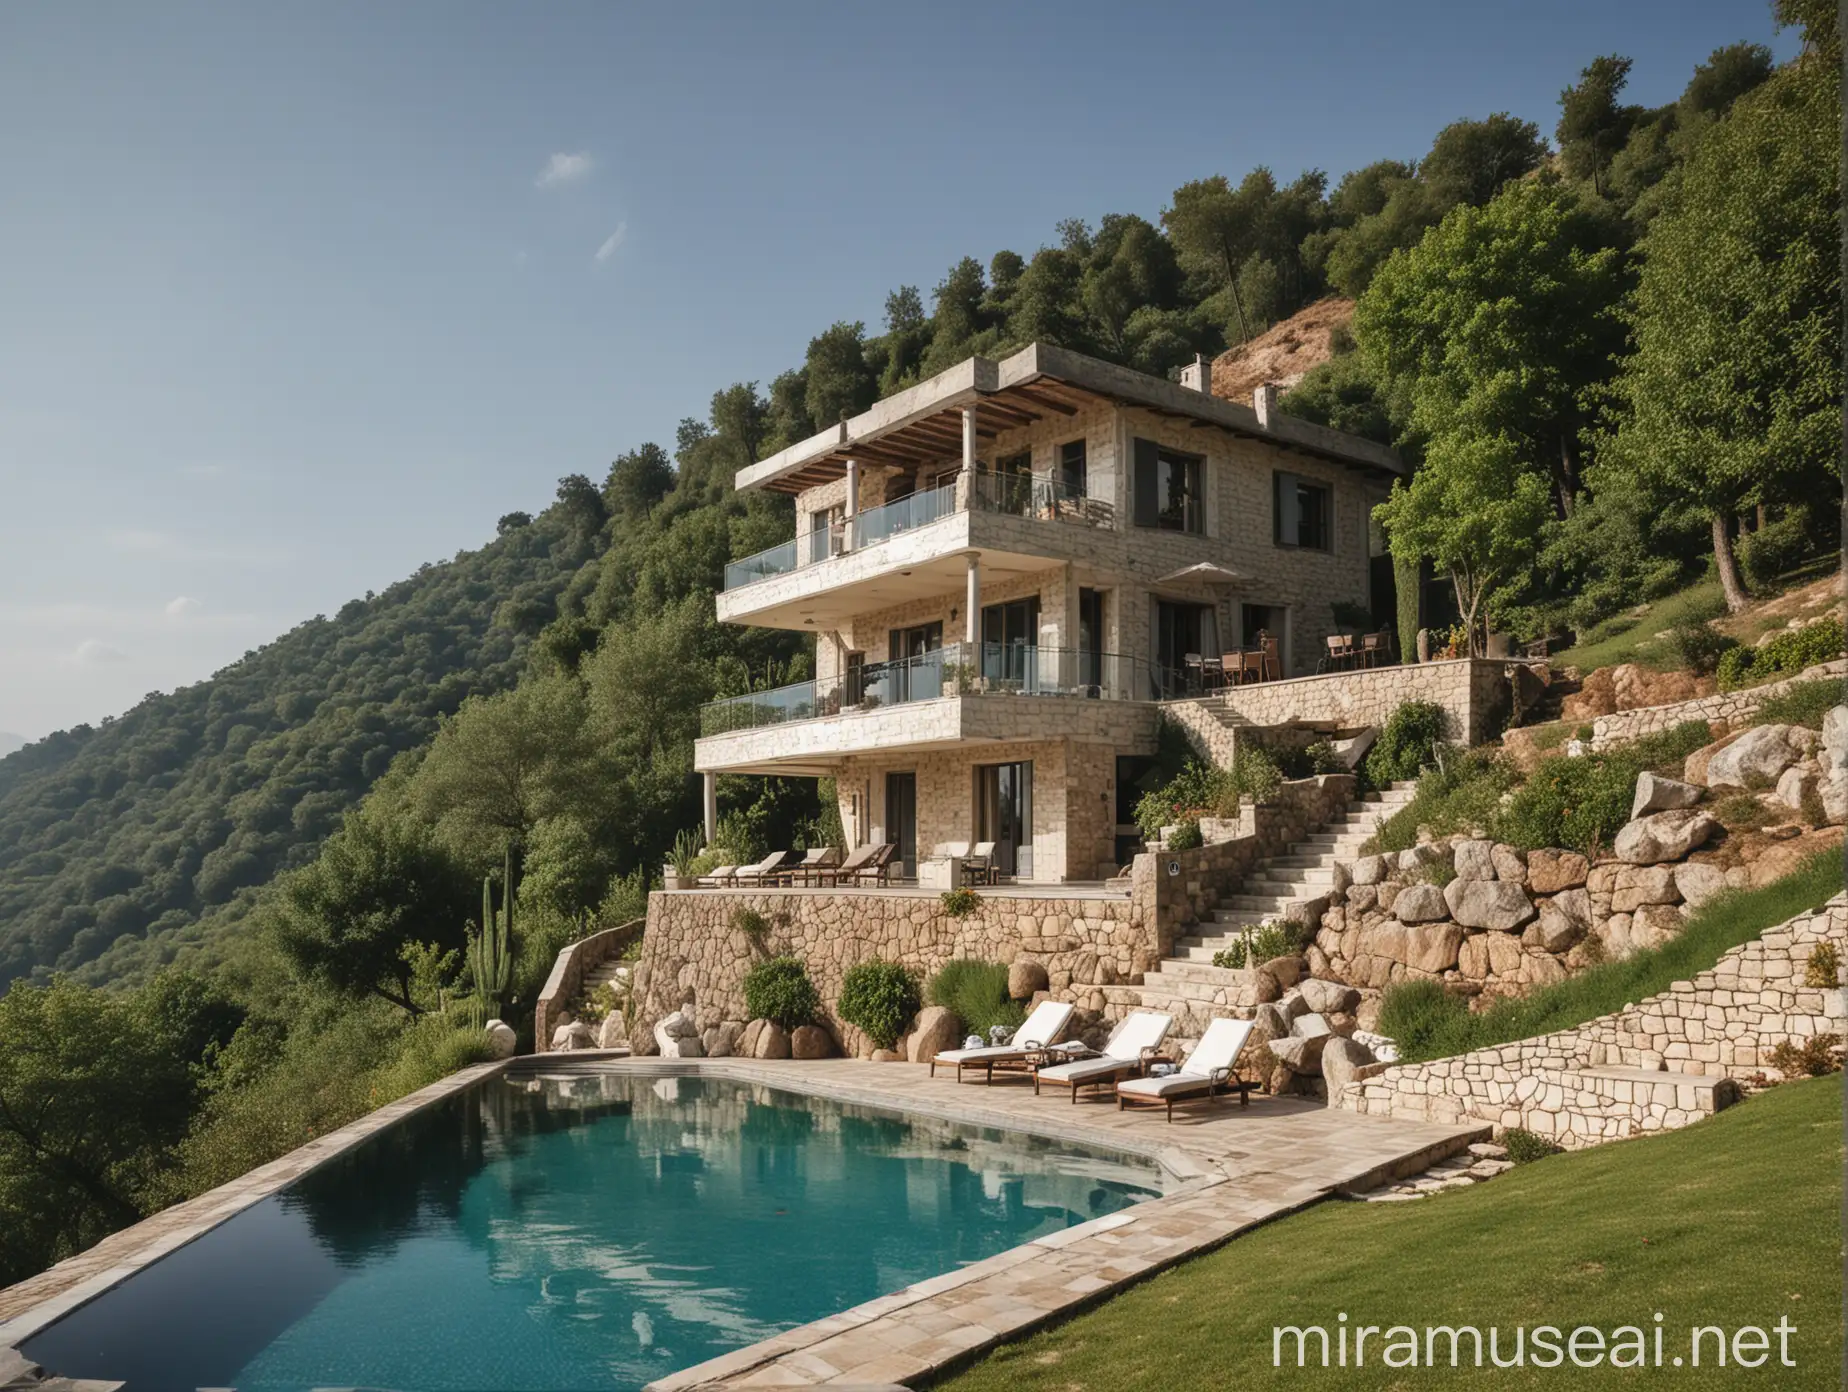 A villa with a hill side swimming pool
